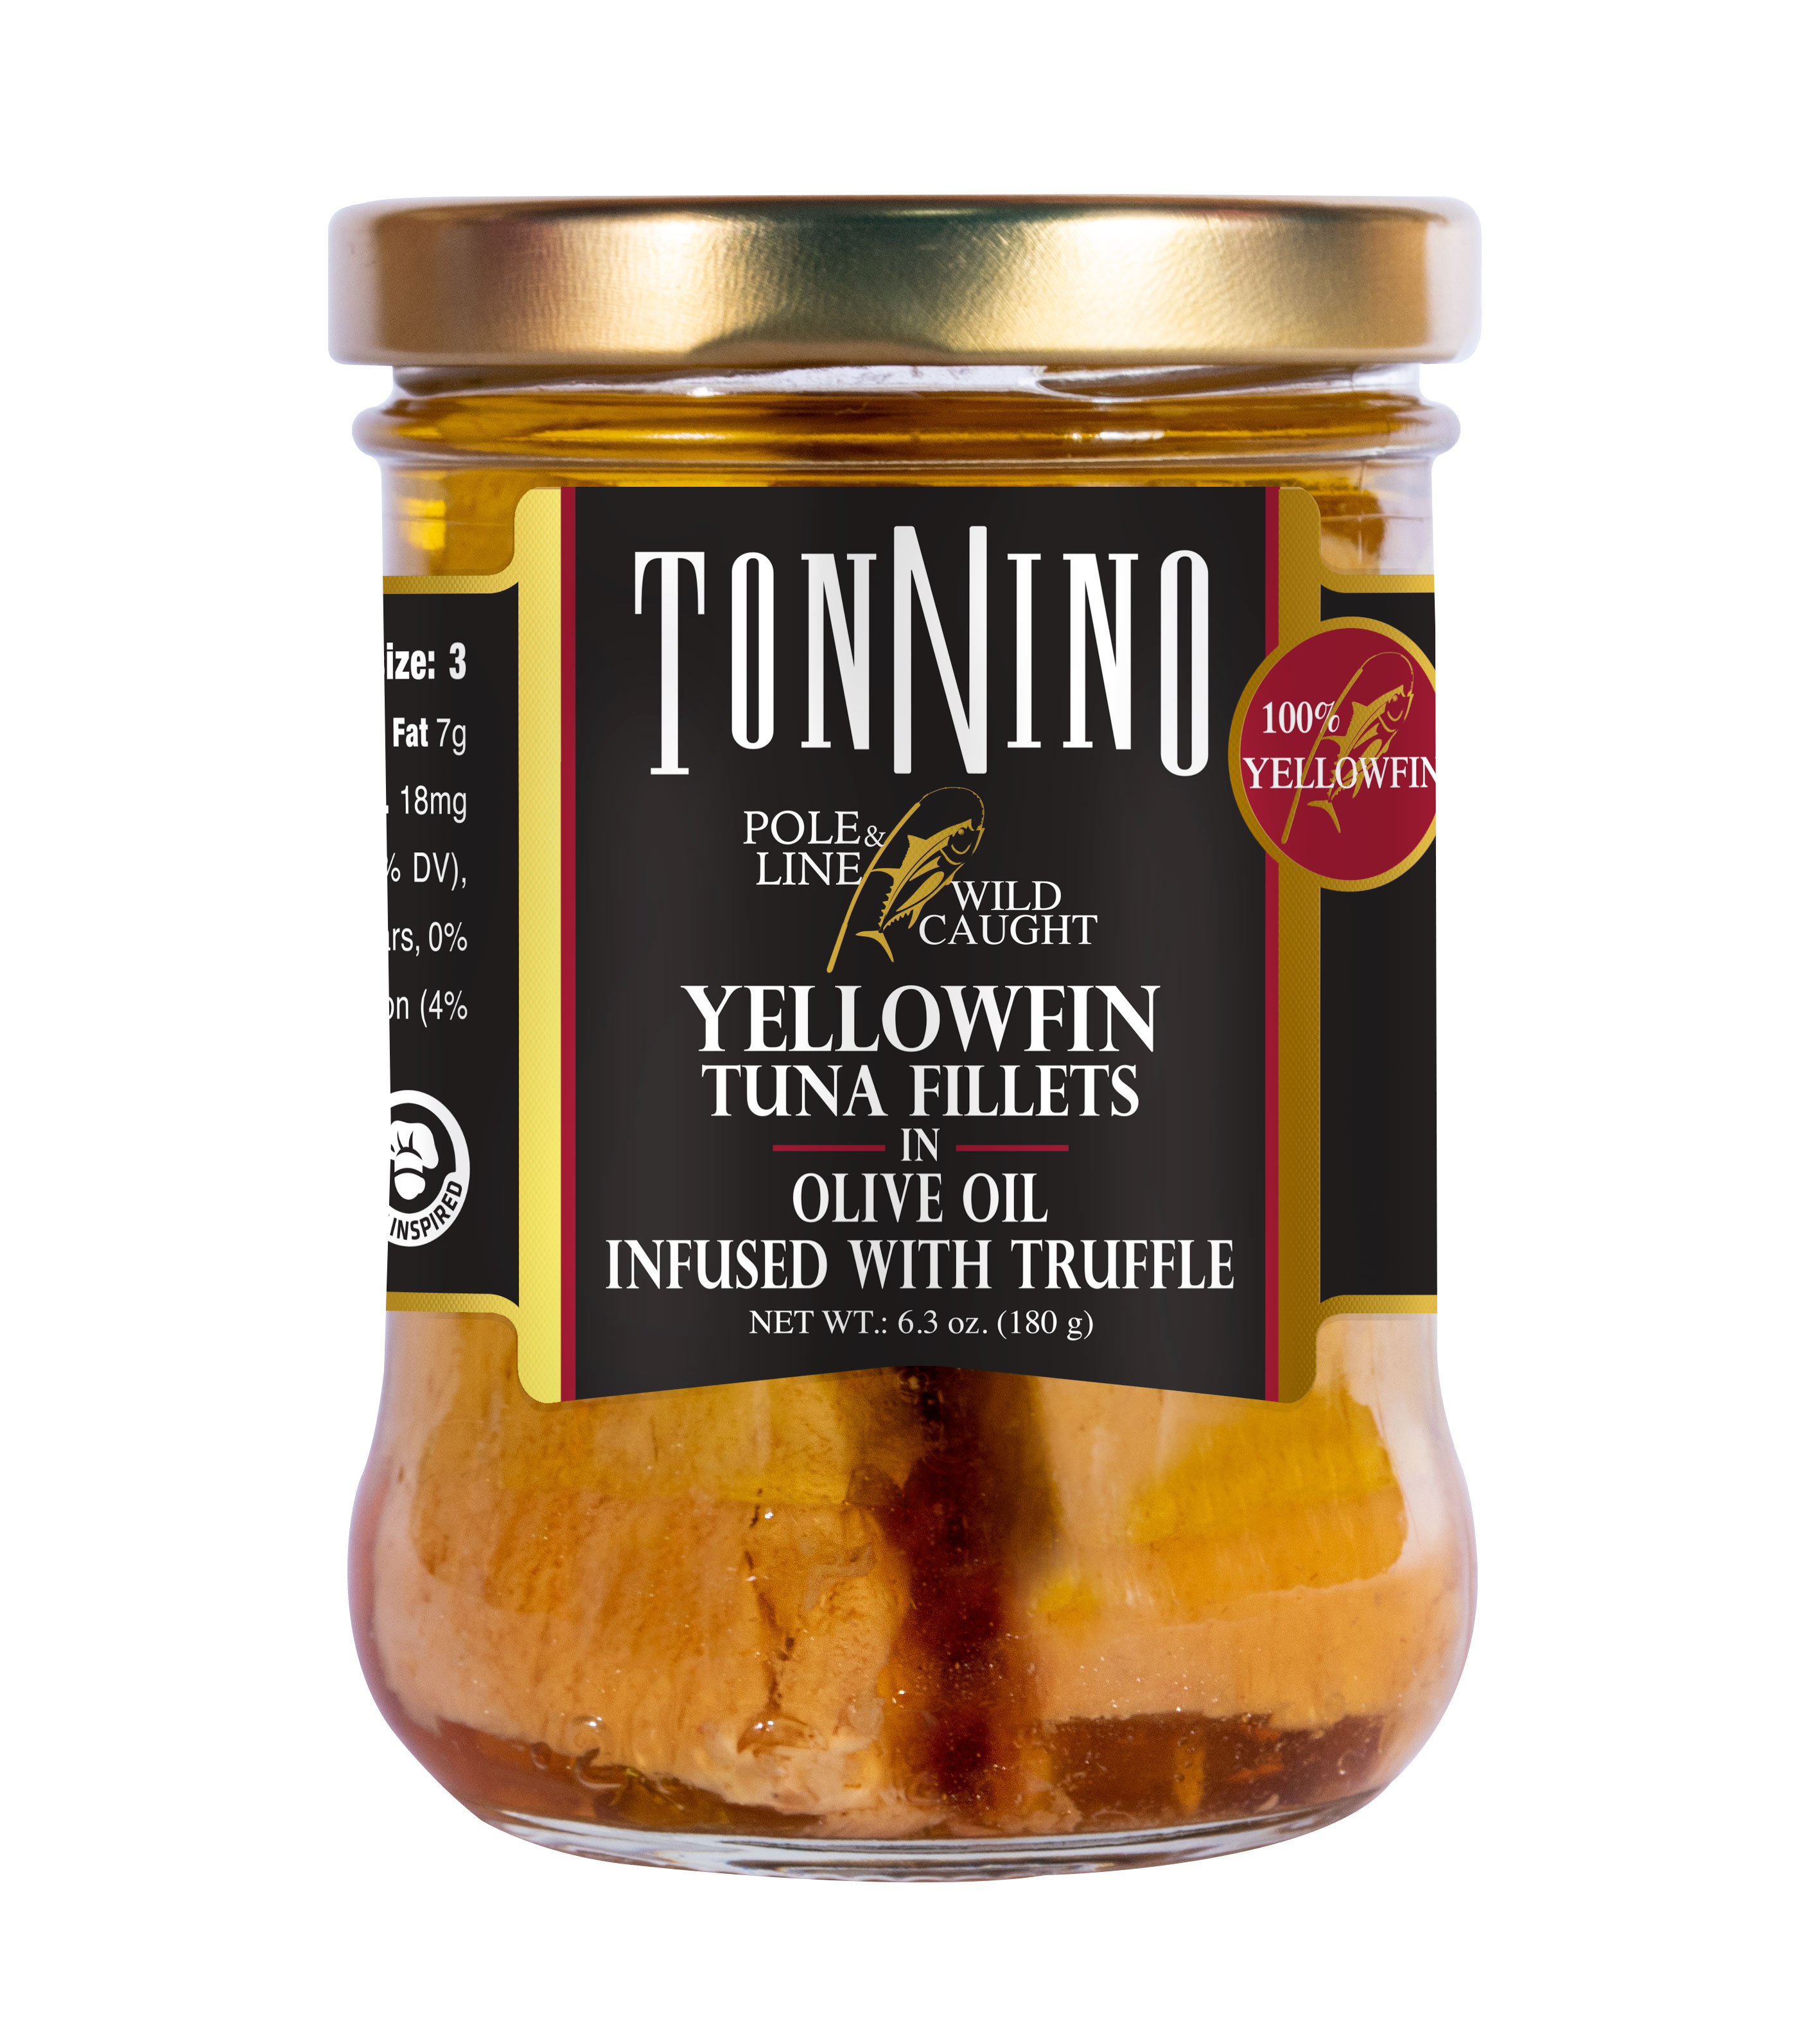 Tonnino Pole & Line - Yellowfin Tuna Fillets in Olive Oil infused with Truffle 6.3 oz